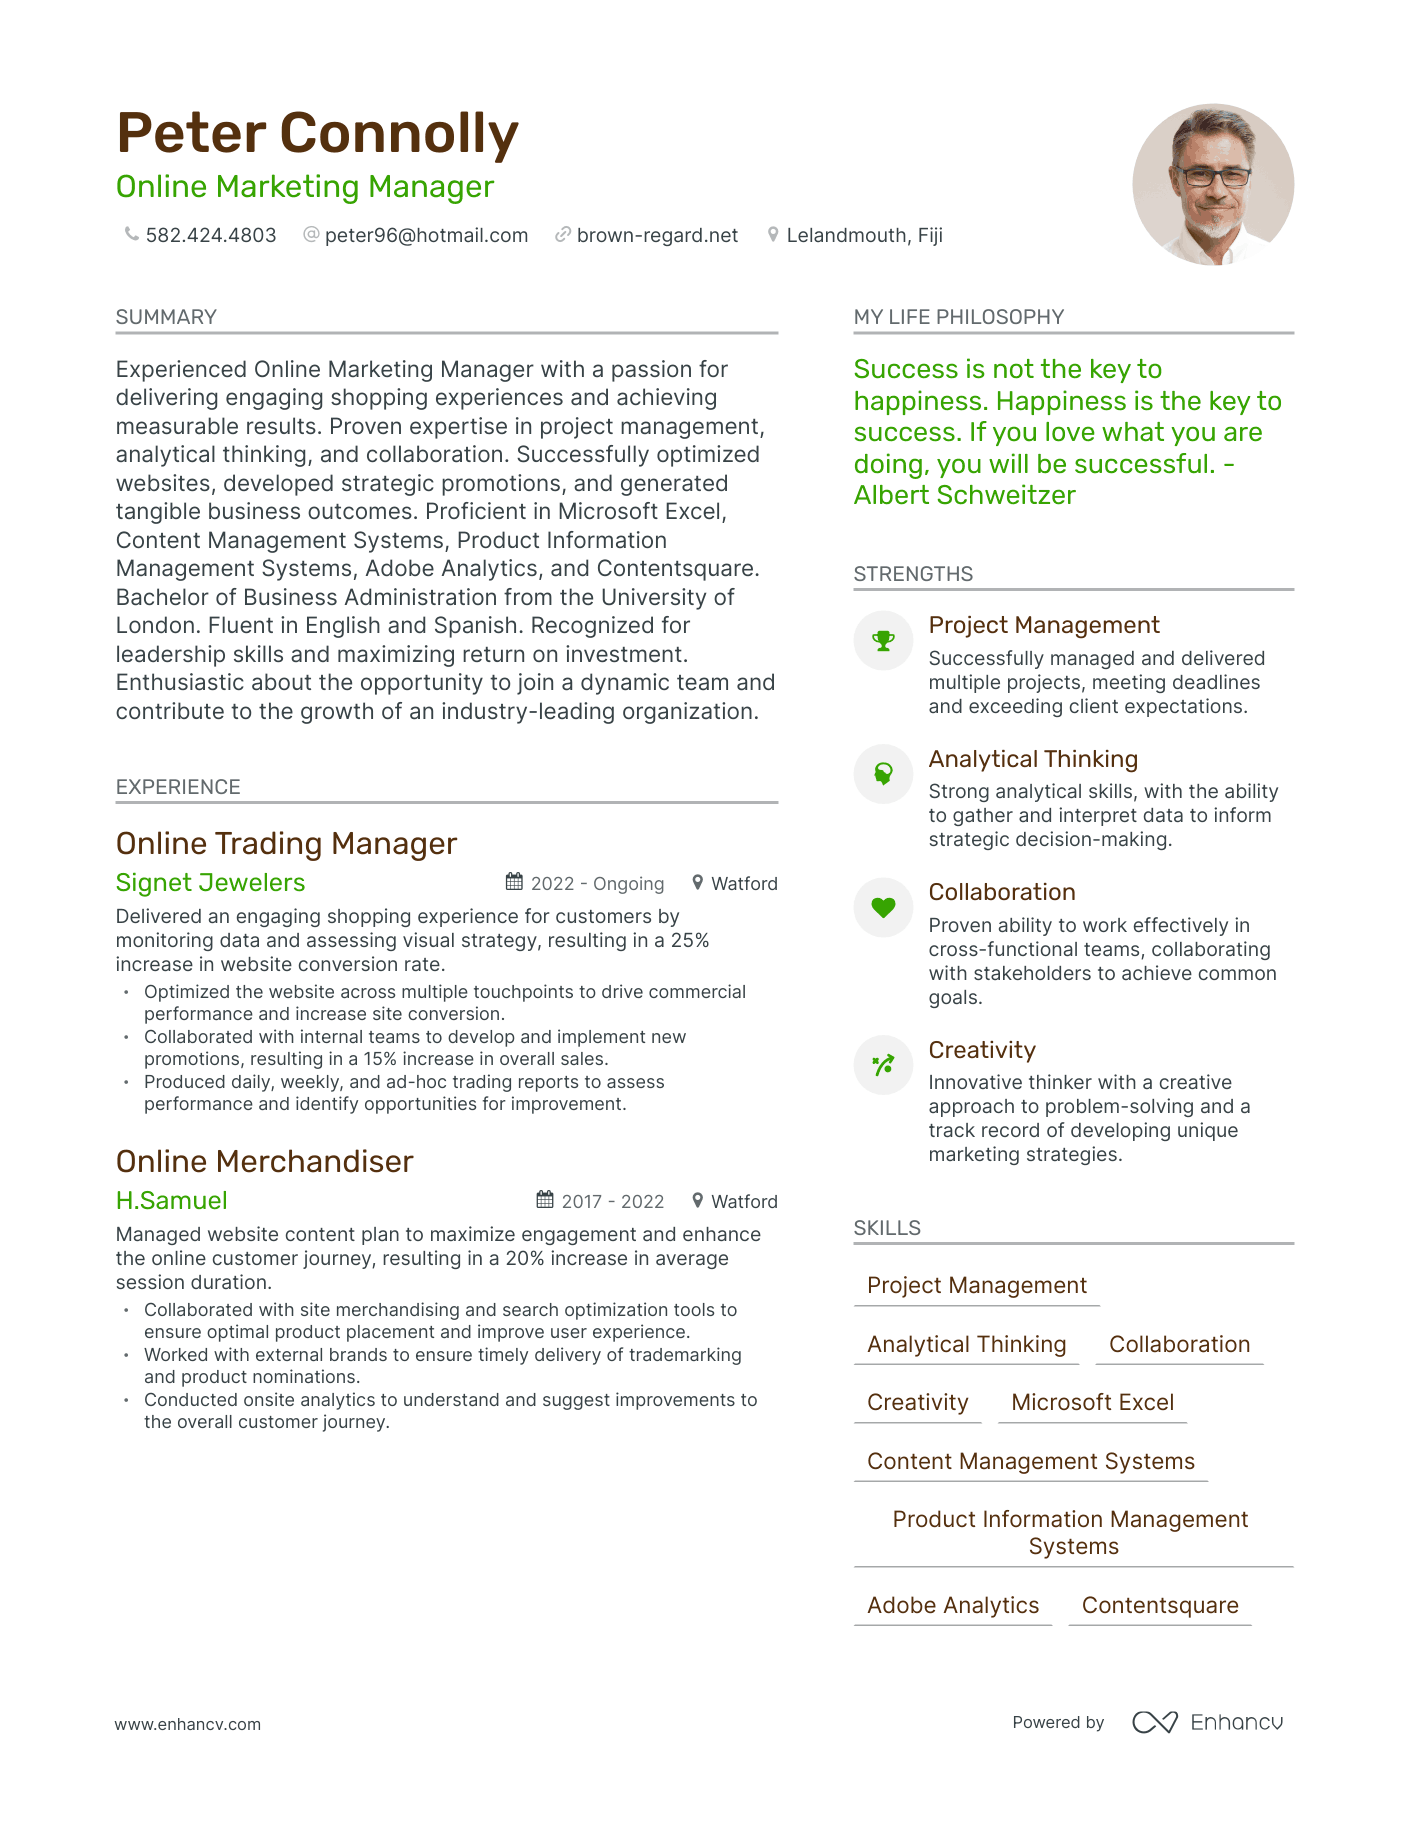 Online Marketing Manager resume example